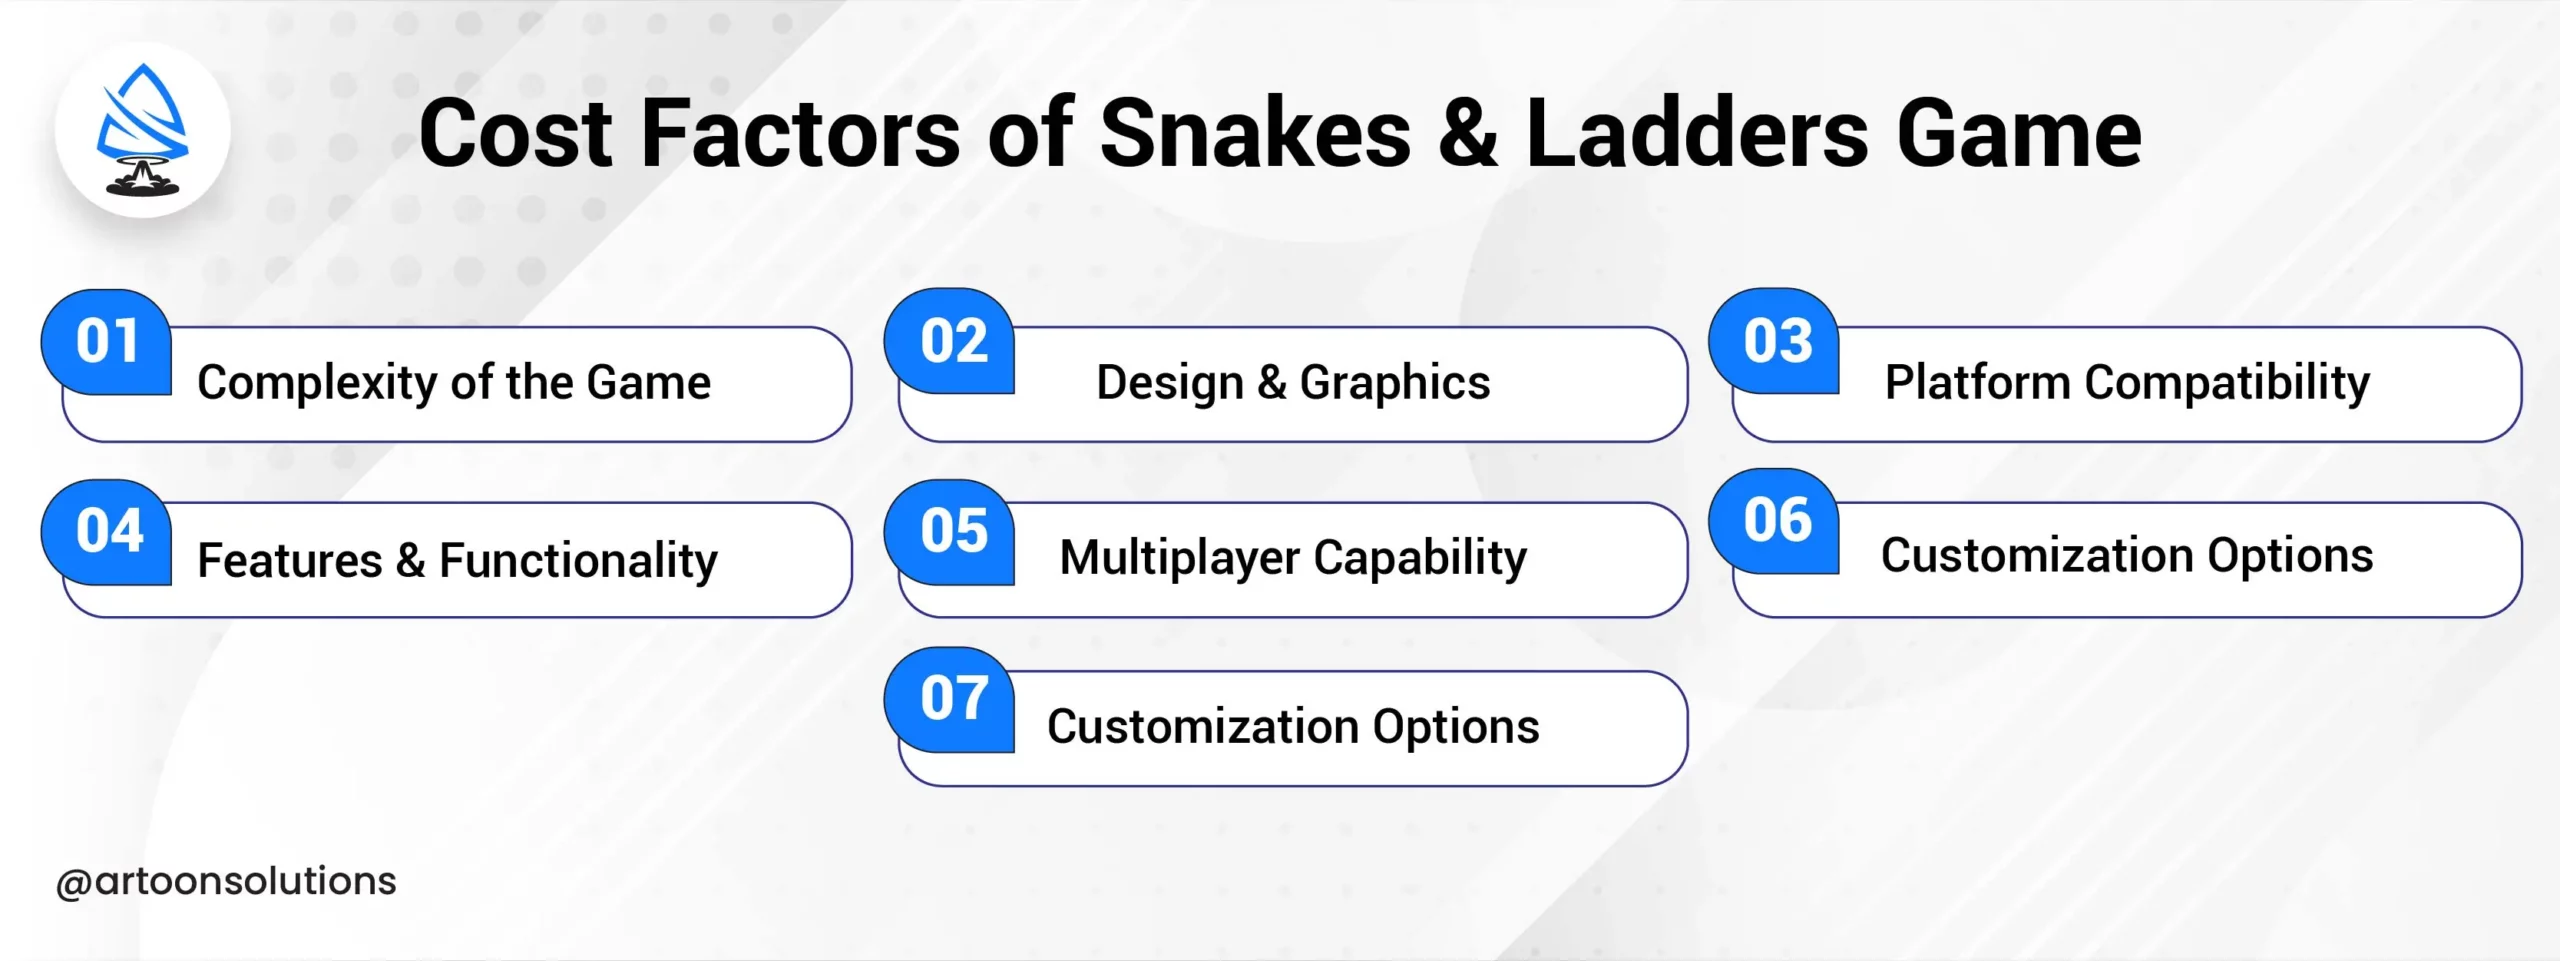 Factors Influencing The Cost of Snakes & Ladders Game Development